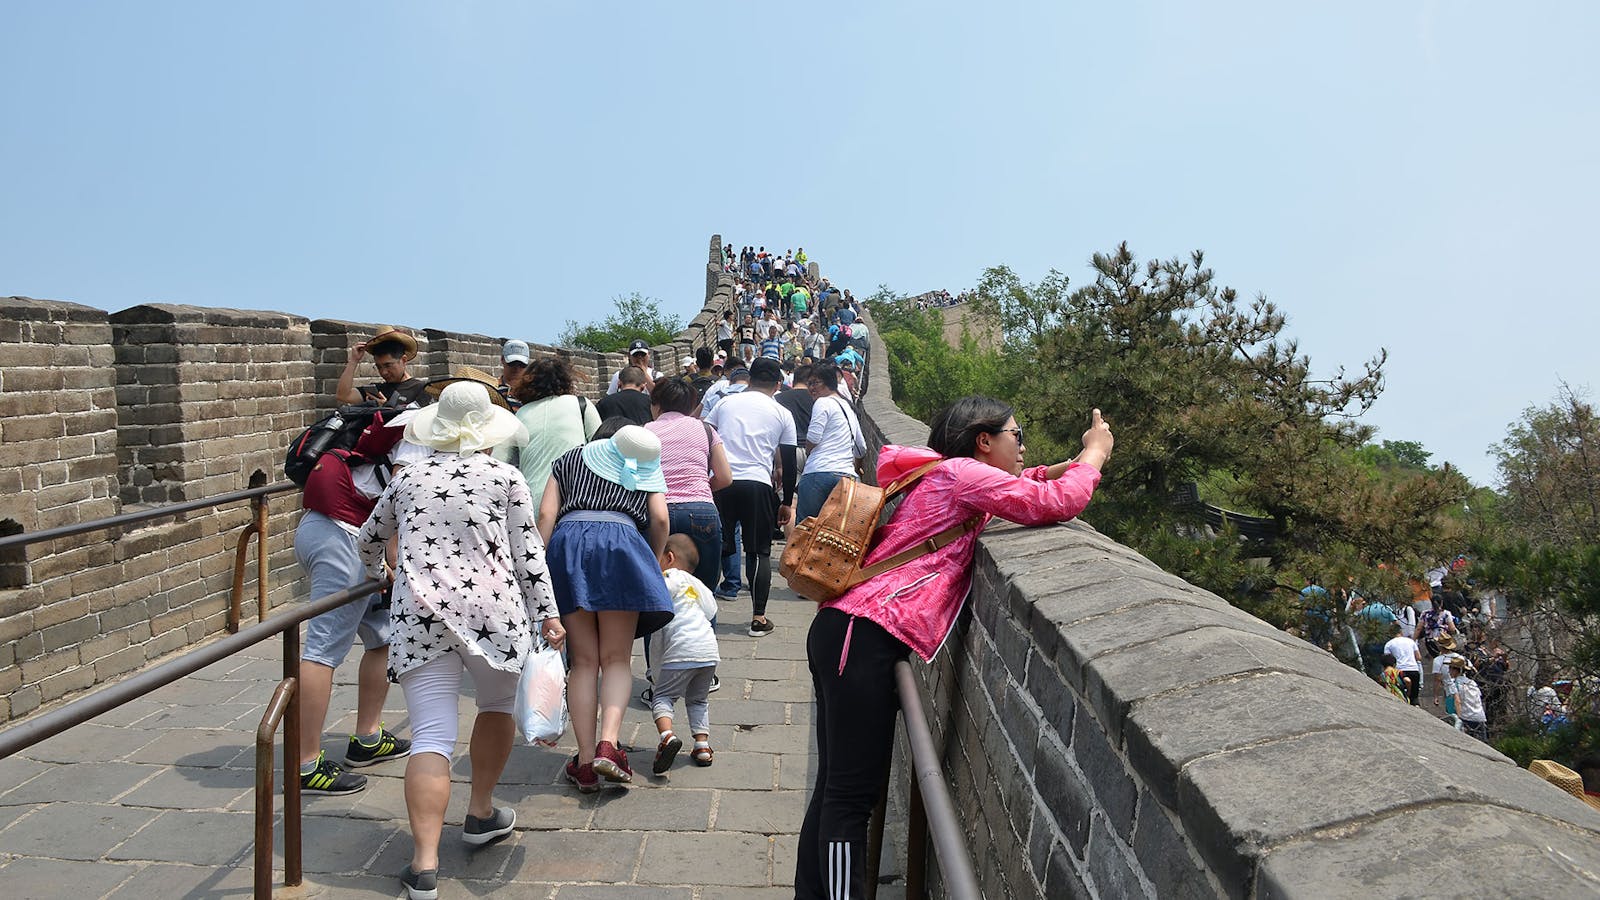 Visitors on the Great Wall of China. Photo by shankar s./Flickr